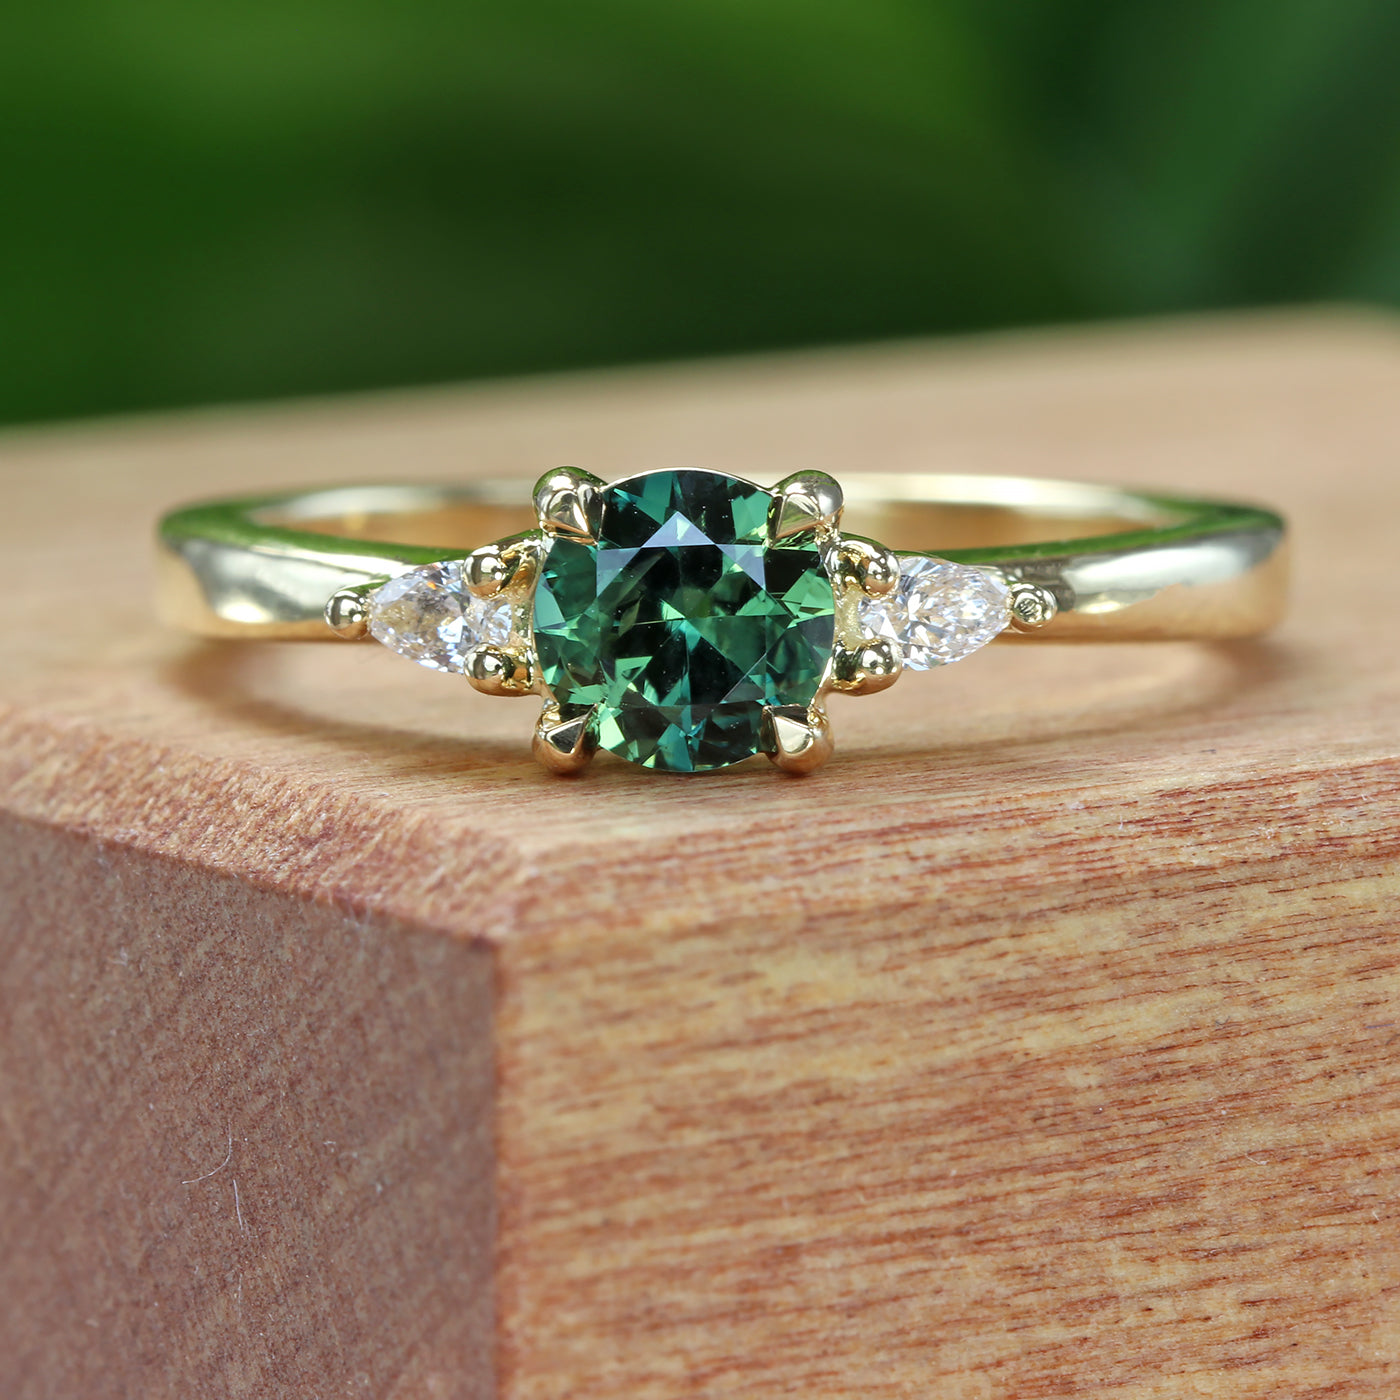 Fair Trade Green Sapphire & Diamond Trilogy Engagement Ring, Size M 1/2 (resize J to P 1/2)